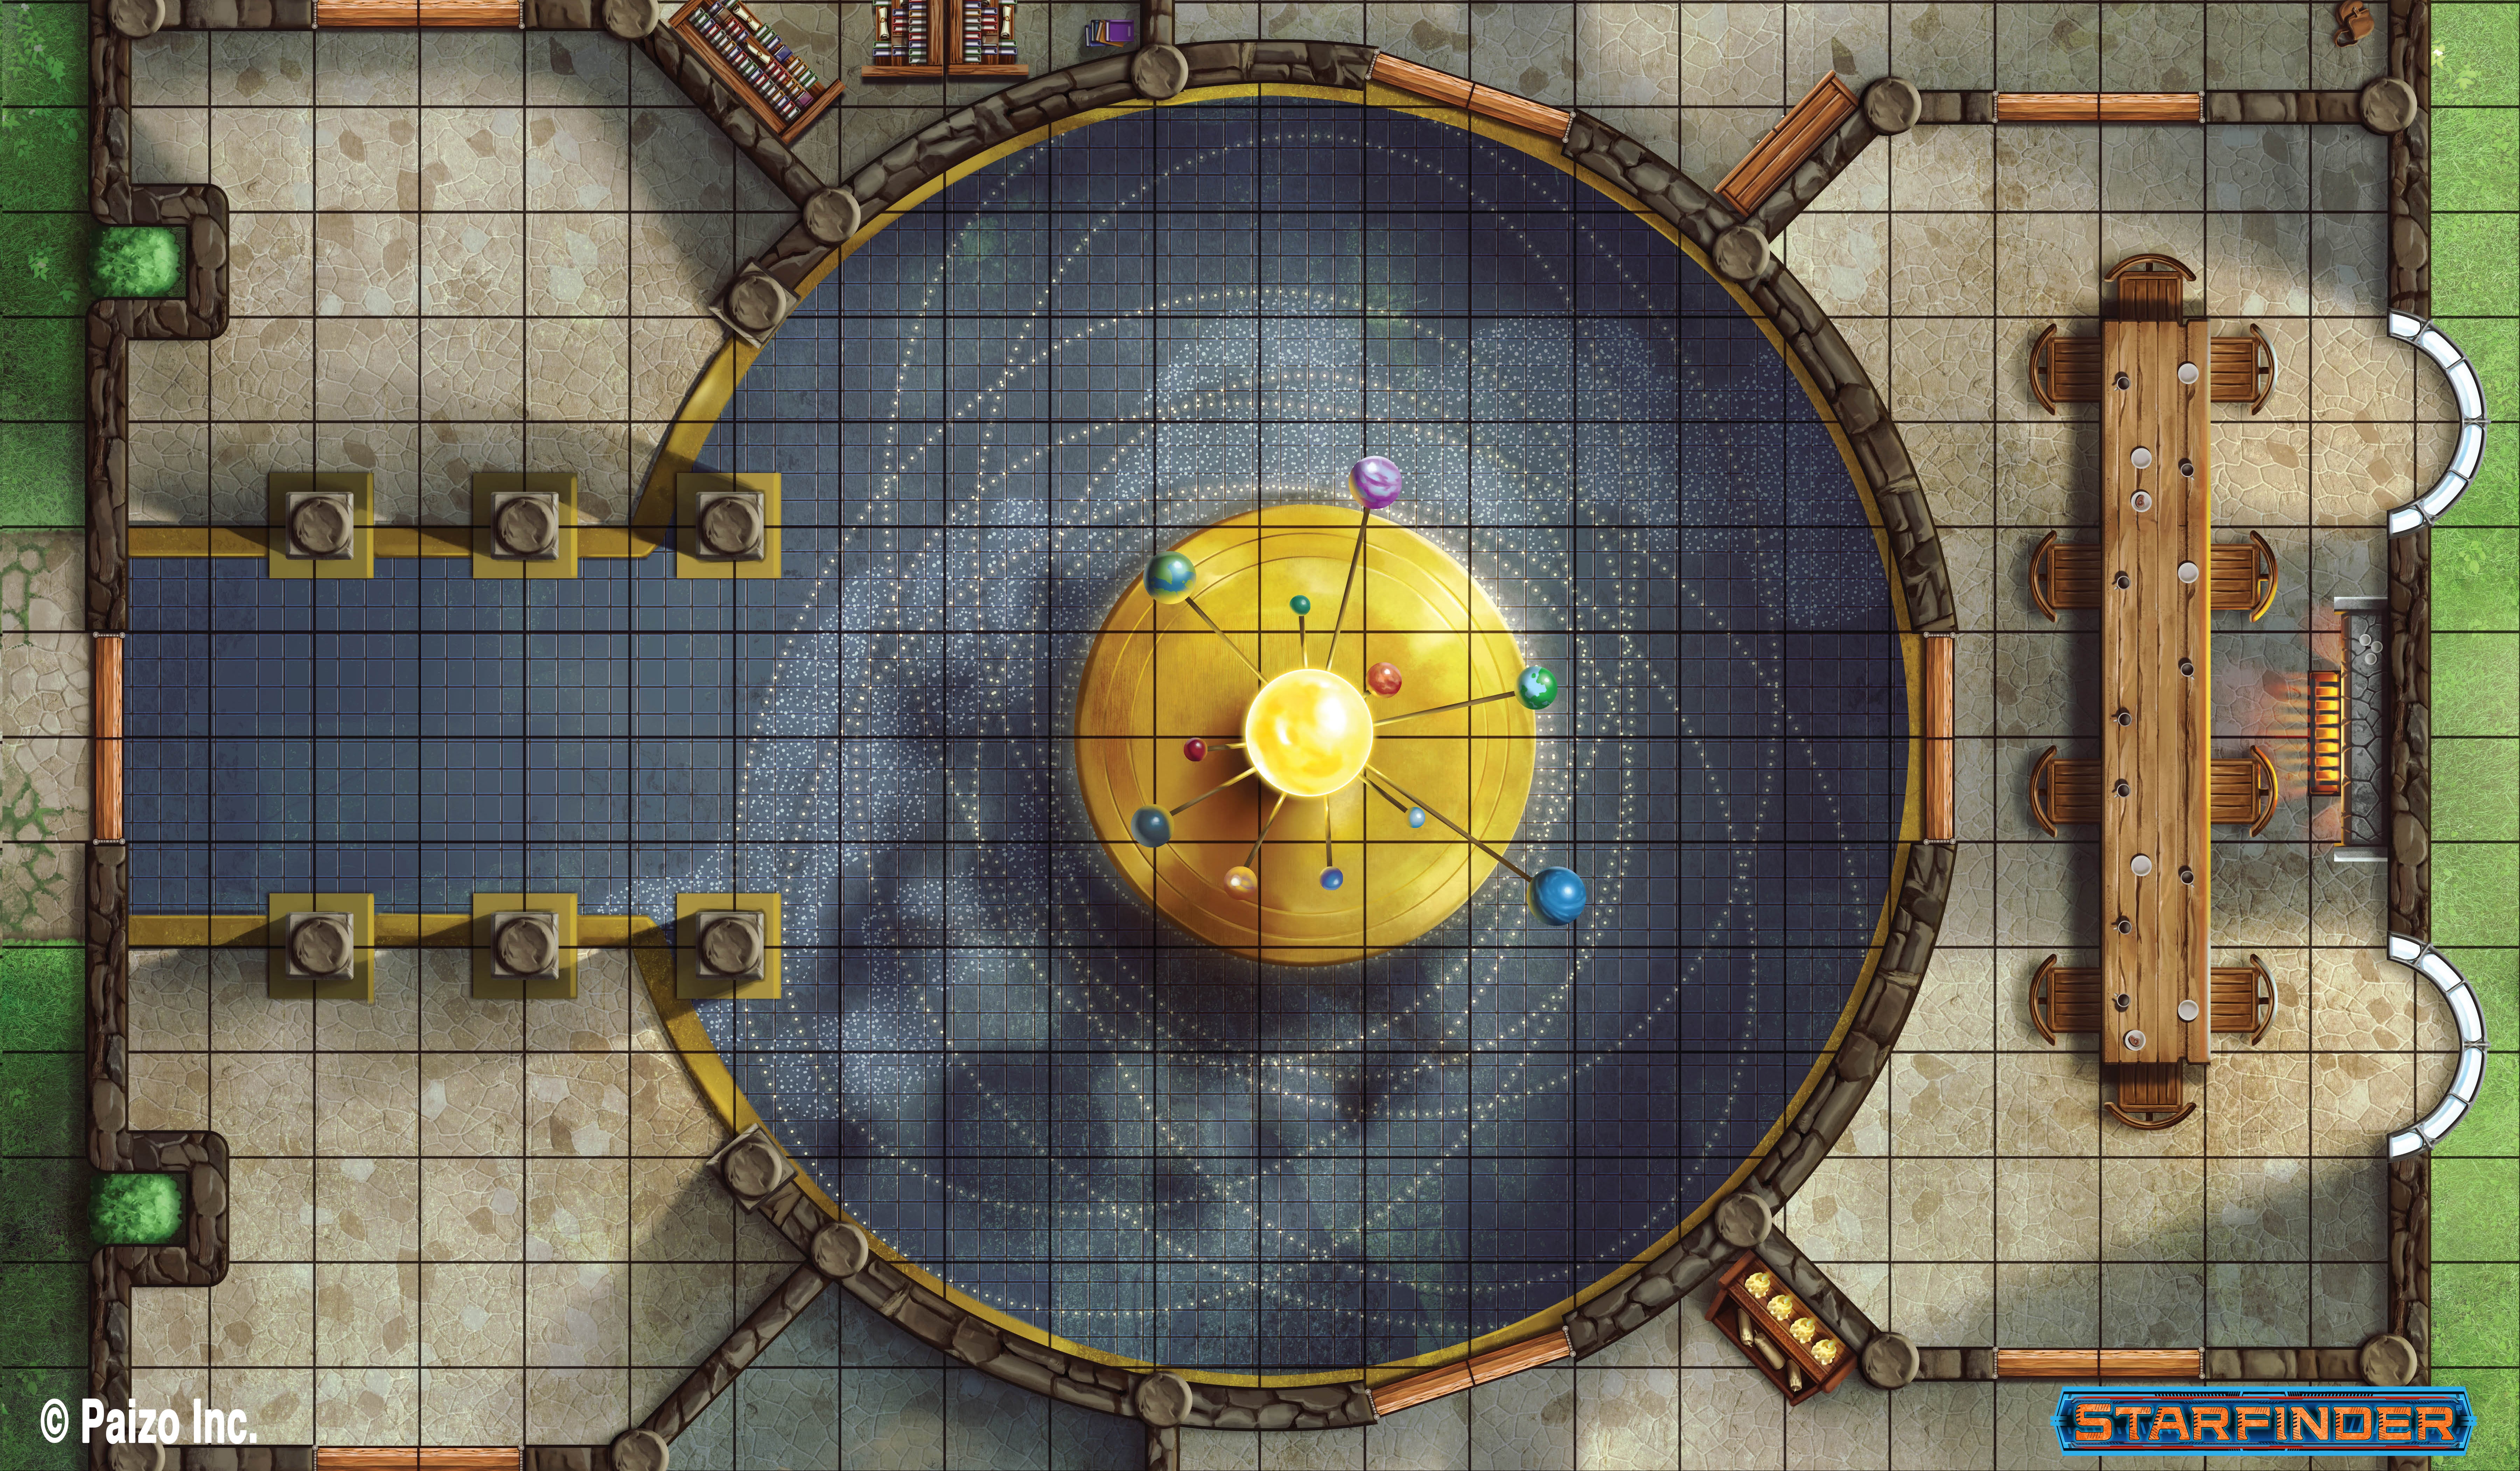 An unlabeled flip tile map of large room with an orrery in the center and a long table towards the back